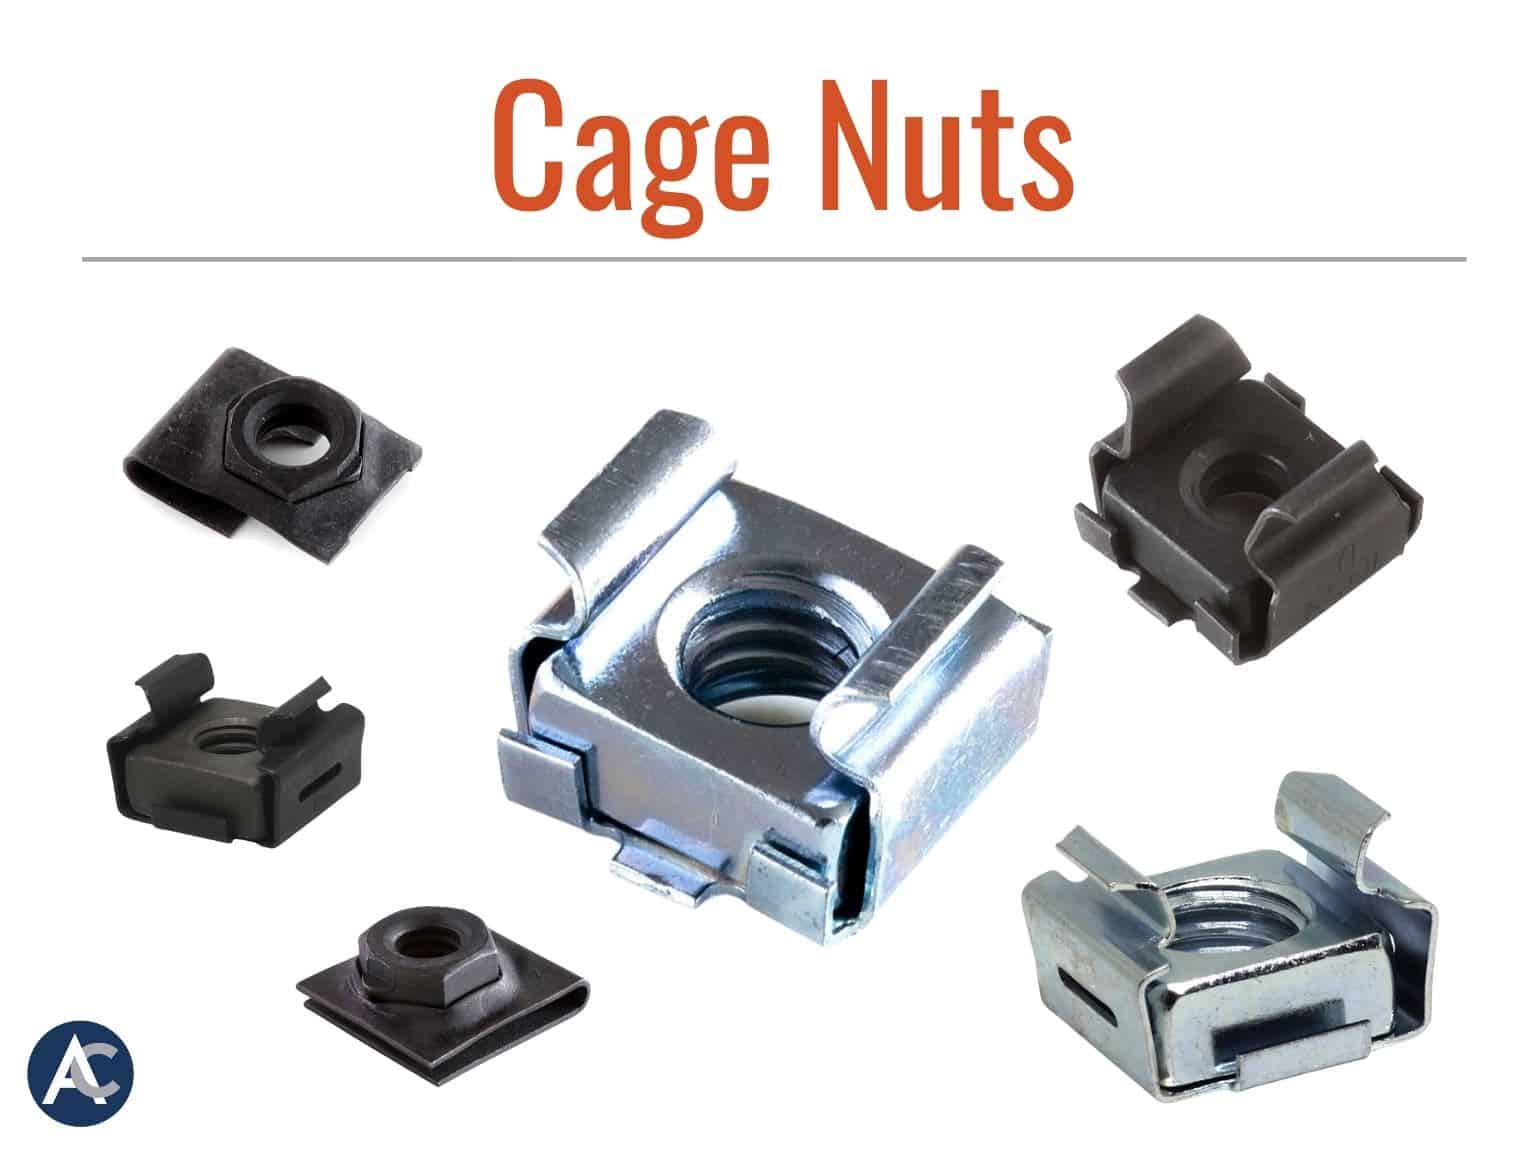 Cage Nuts, Captive Nuts, Server Rack Nuts